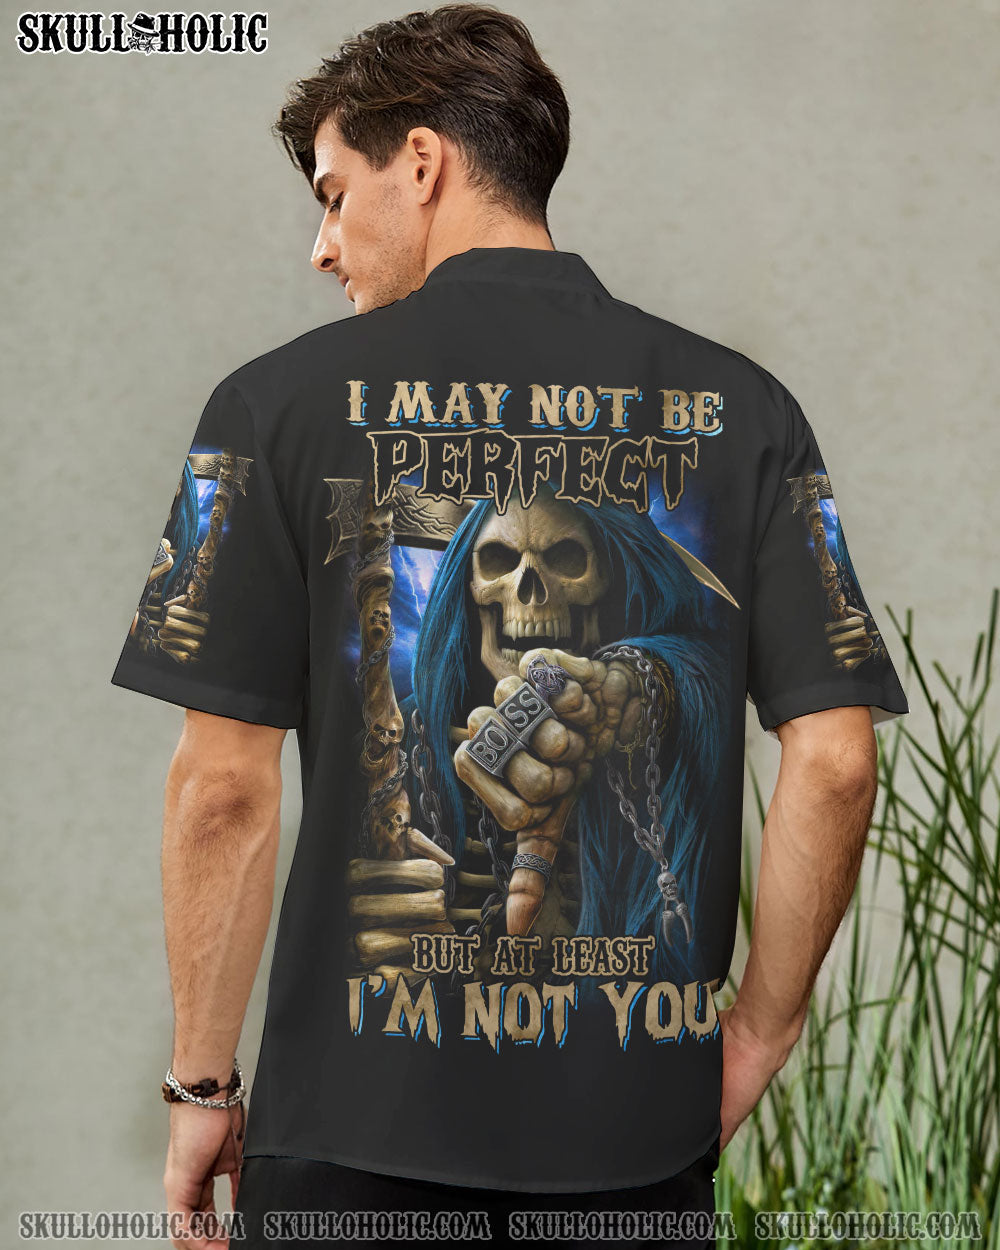 AT LEAST I'M NOT YOU REAPER BASEBALL JERSEY - TLNZ0609223